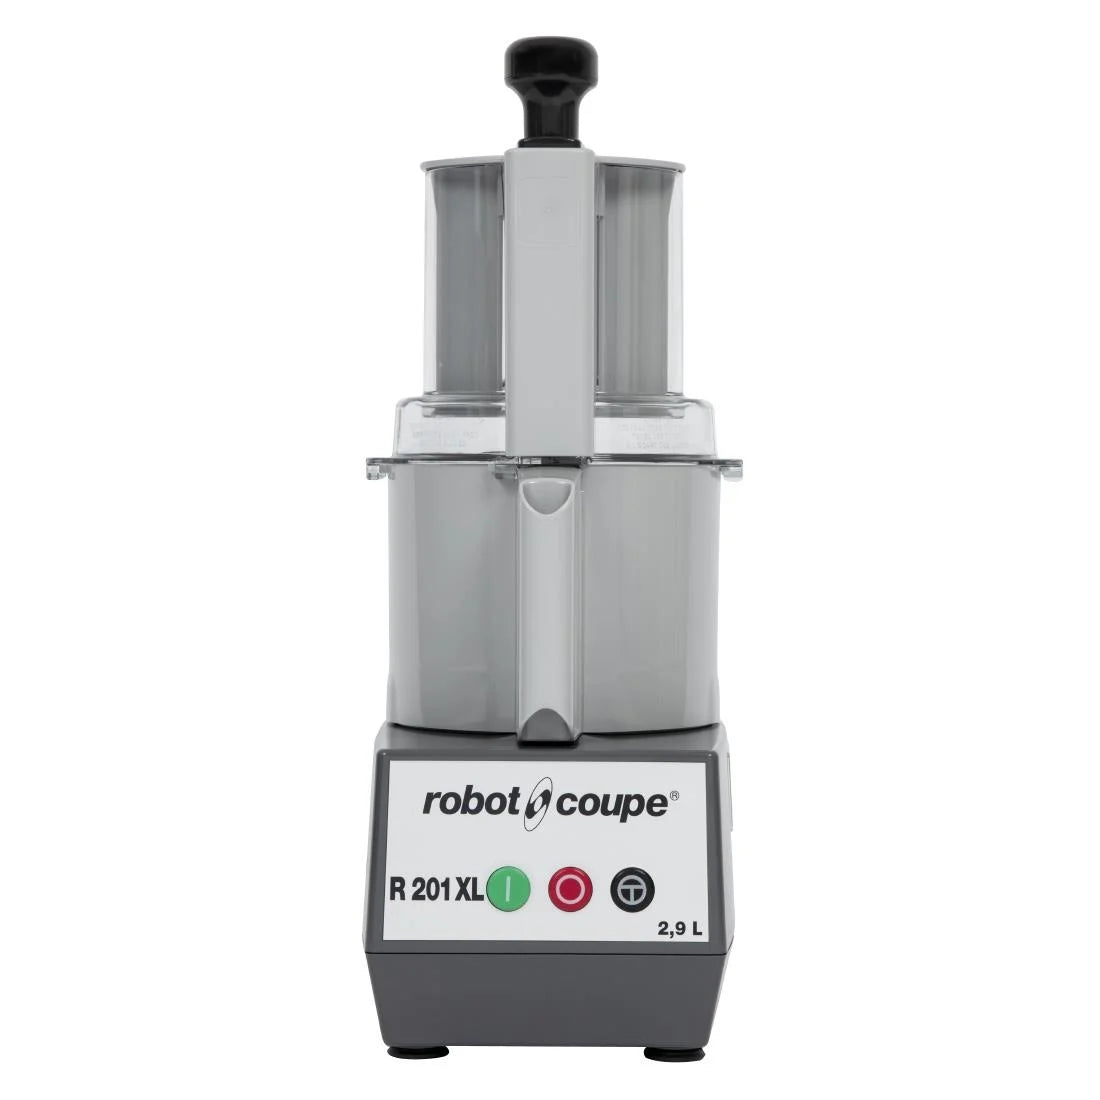 Robot Coupe Food Processor R201XL.Product Ref:00722.Model: R201XL. 🚚 3-5 Days Delivery